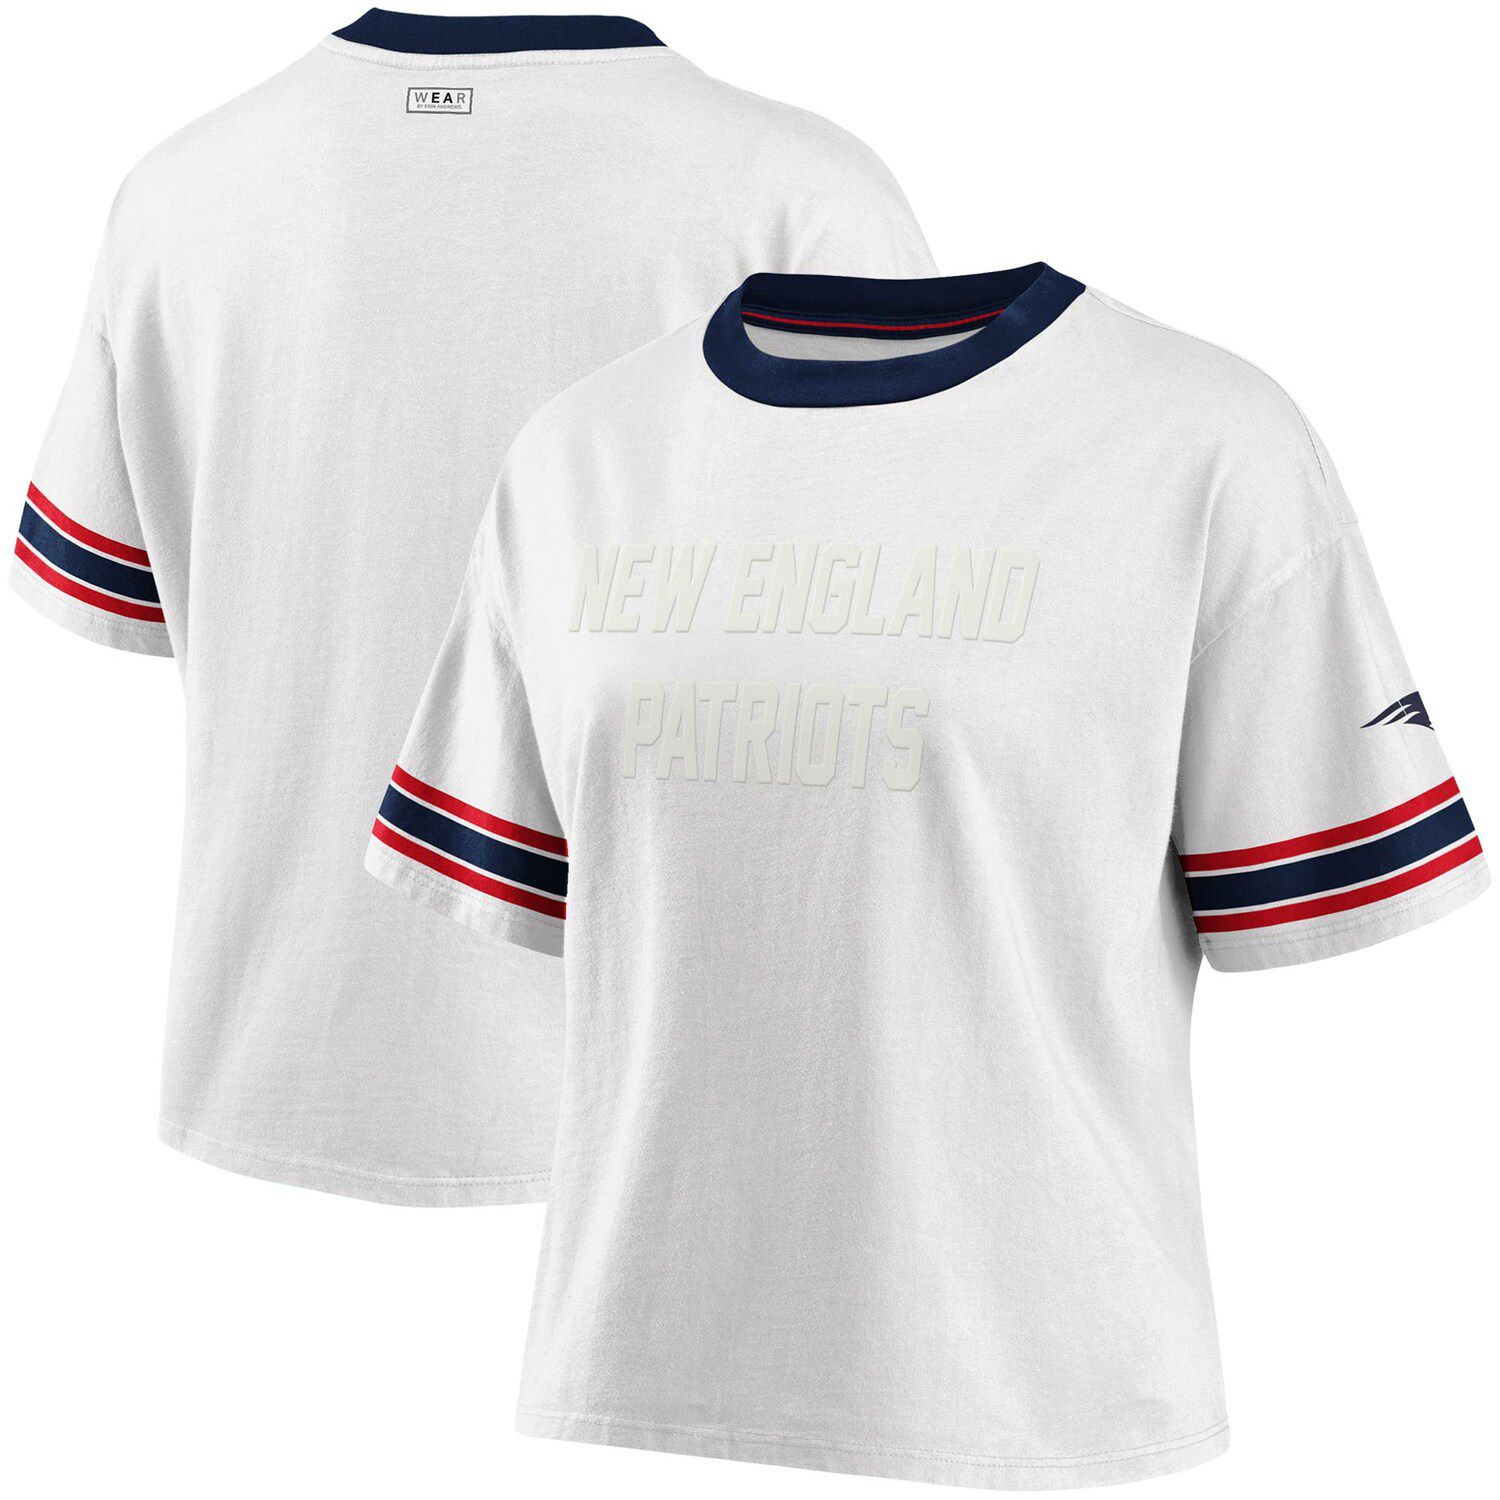 Image for Unbranded Women's WEAR By Erin Andrews White New England Patriots Crop T-Shirt at Kohl's.